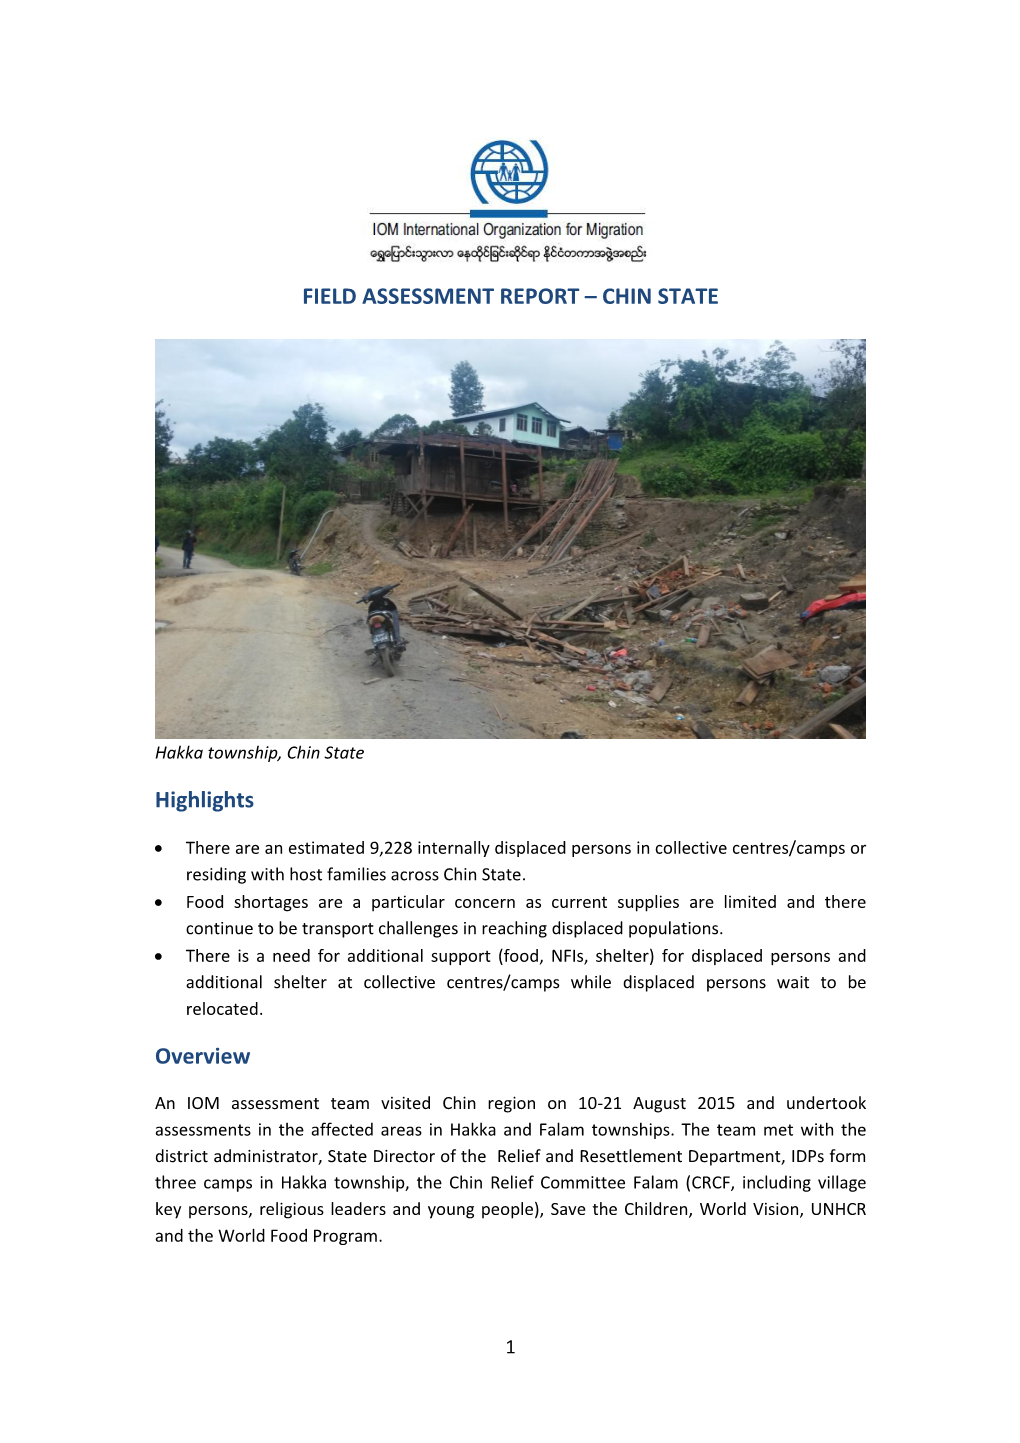 FIELD ASSESSMENT REPORT – CHIN STATE Highlights Overview